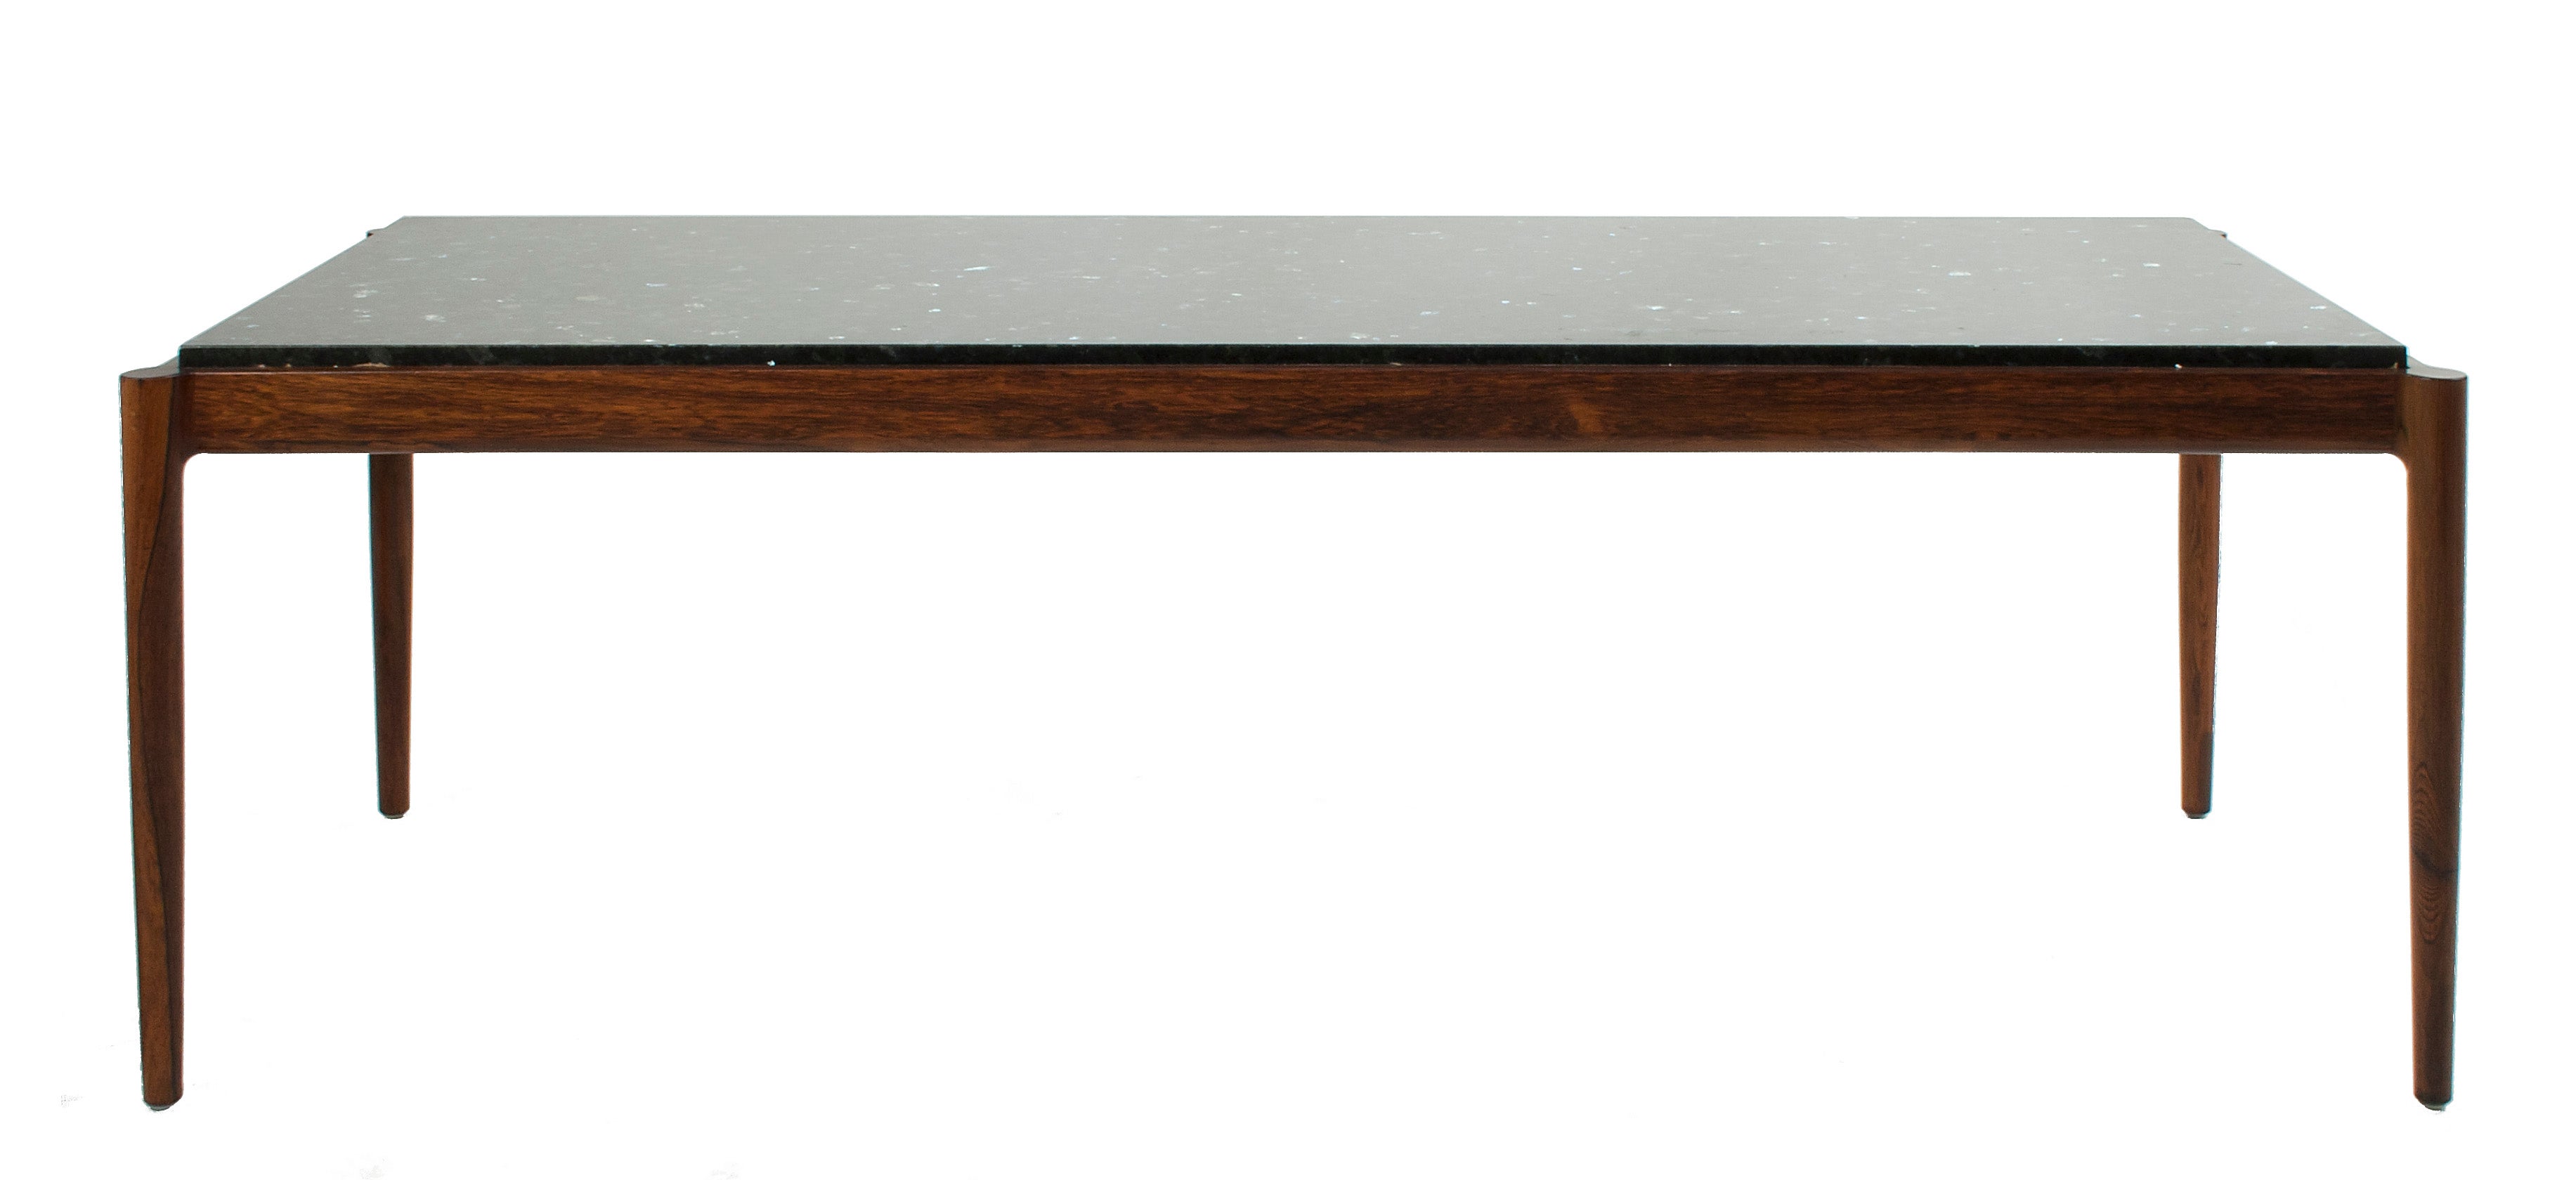 Stone Top Coffee Table by Kofoed Larsen